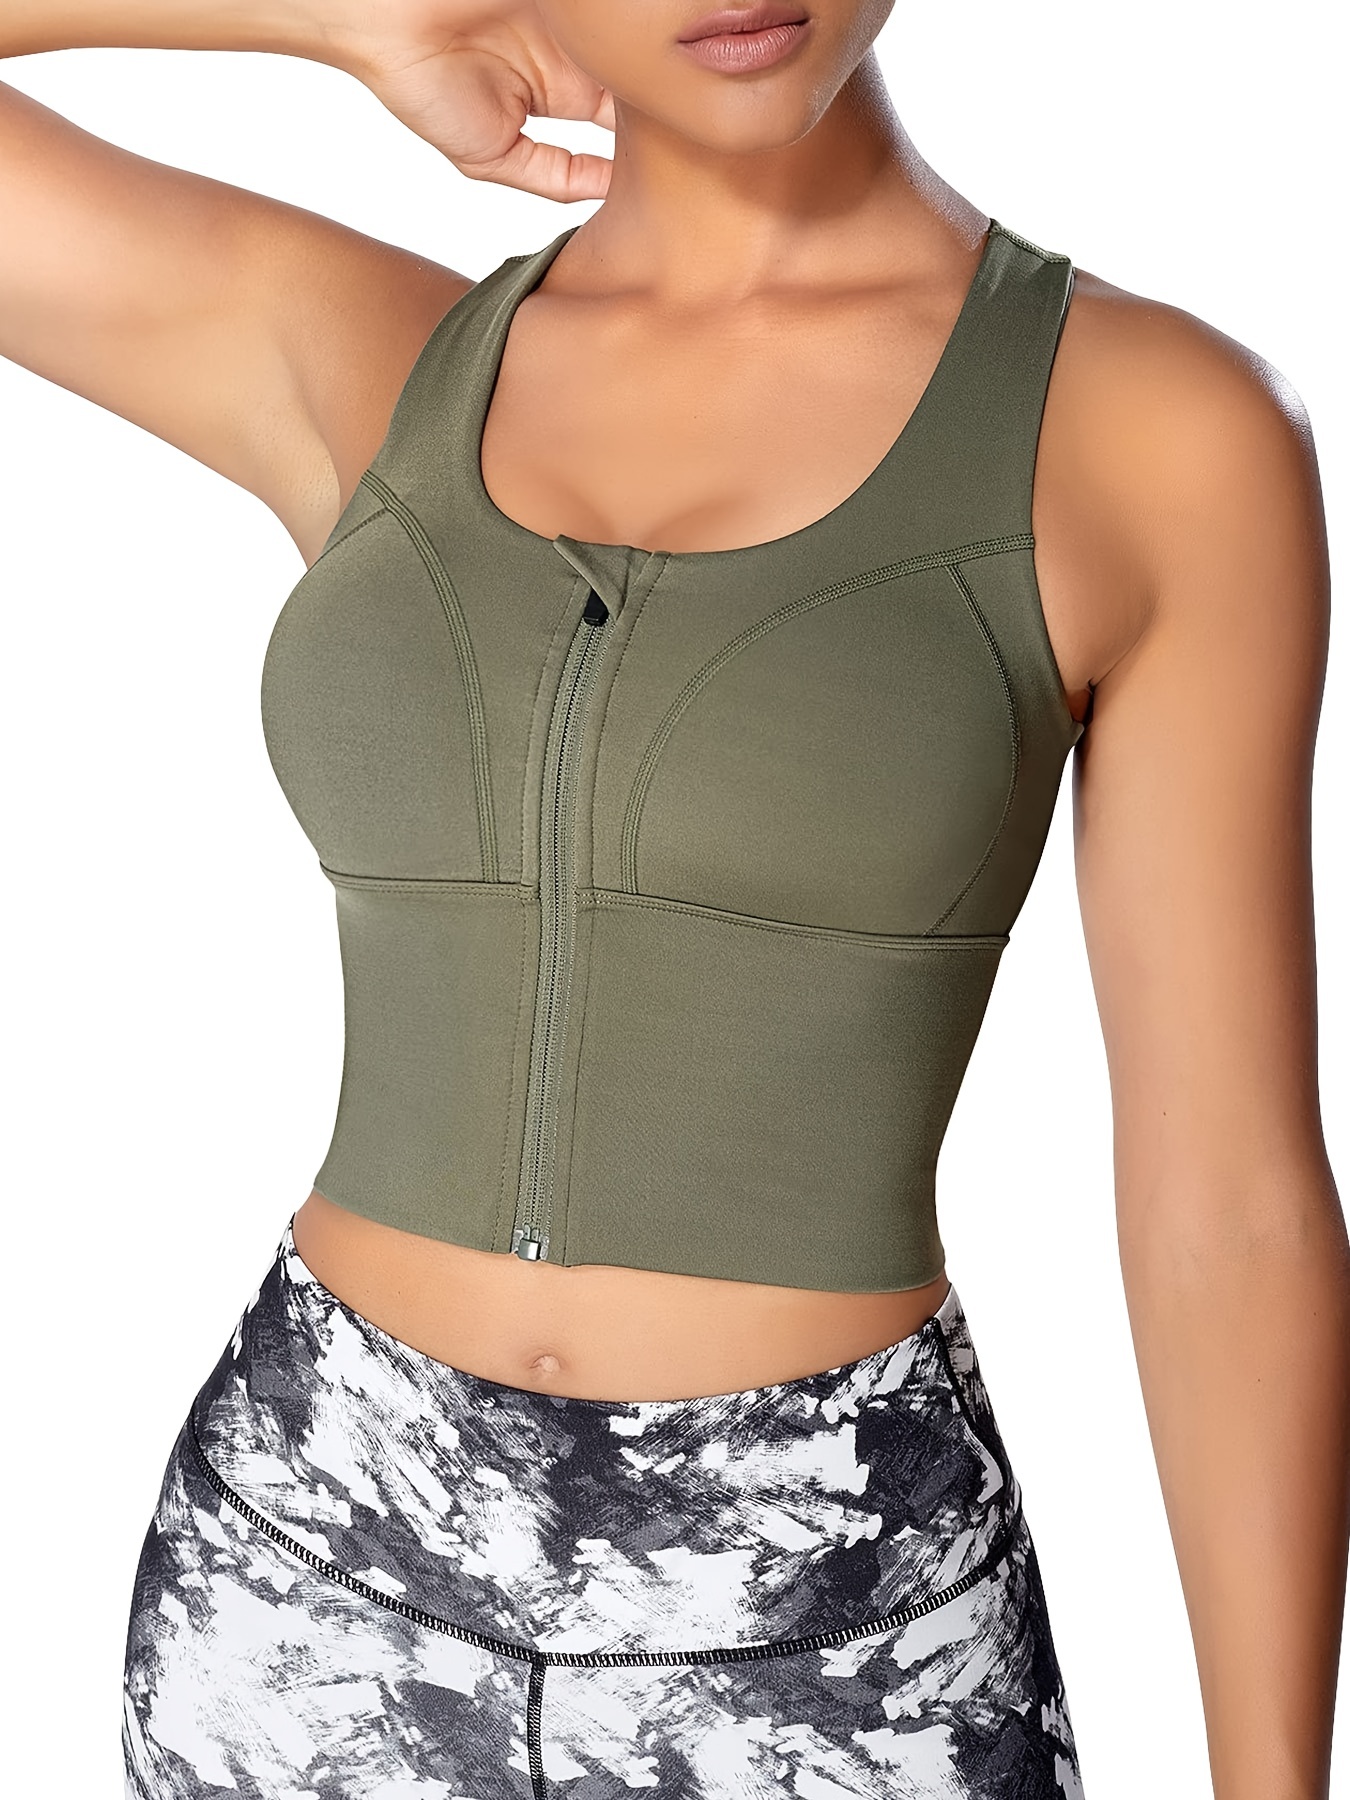 Longline Sports Bra High Impact - V-Neck Criss Cross Back Built-in Padded  Bra,Workout Crop Tops for Yoga Gym Fitness Tank Bra Black at  Women's  Clothing store